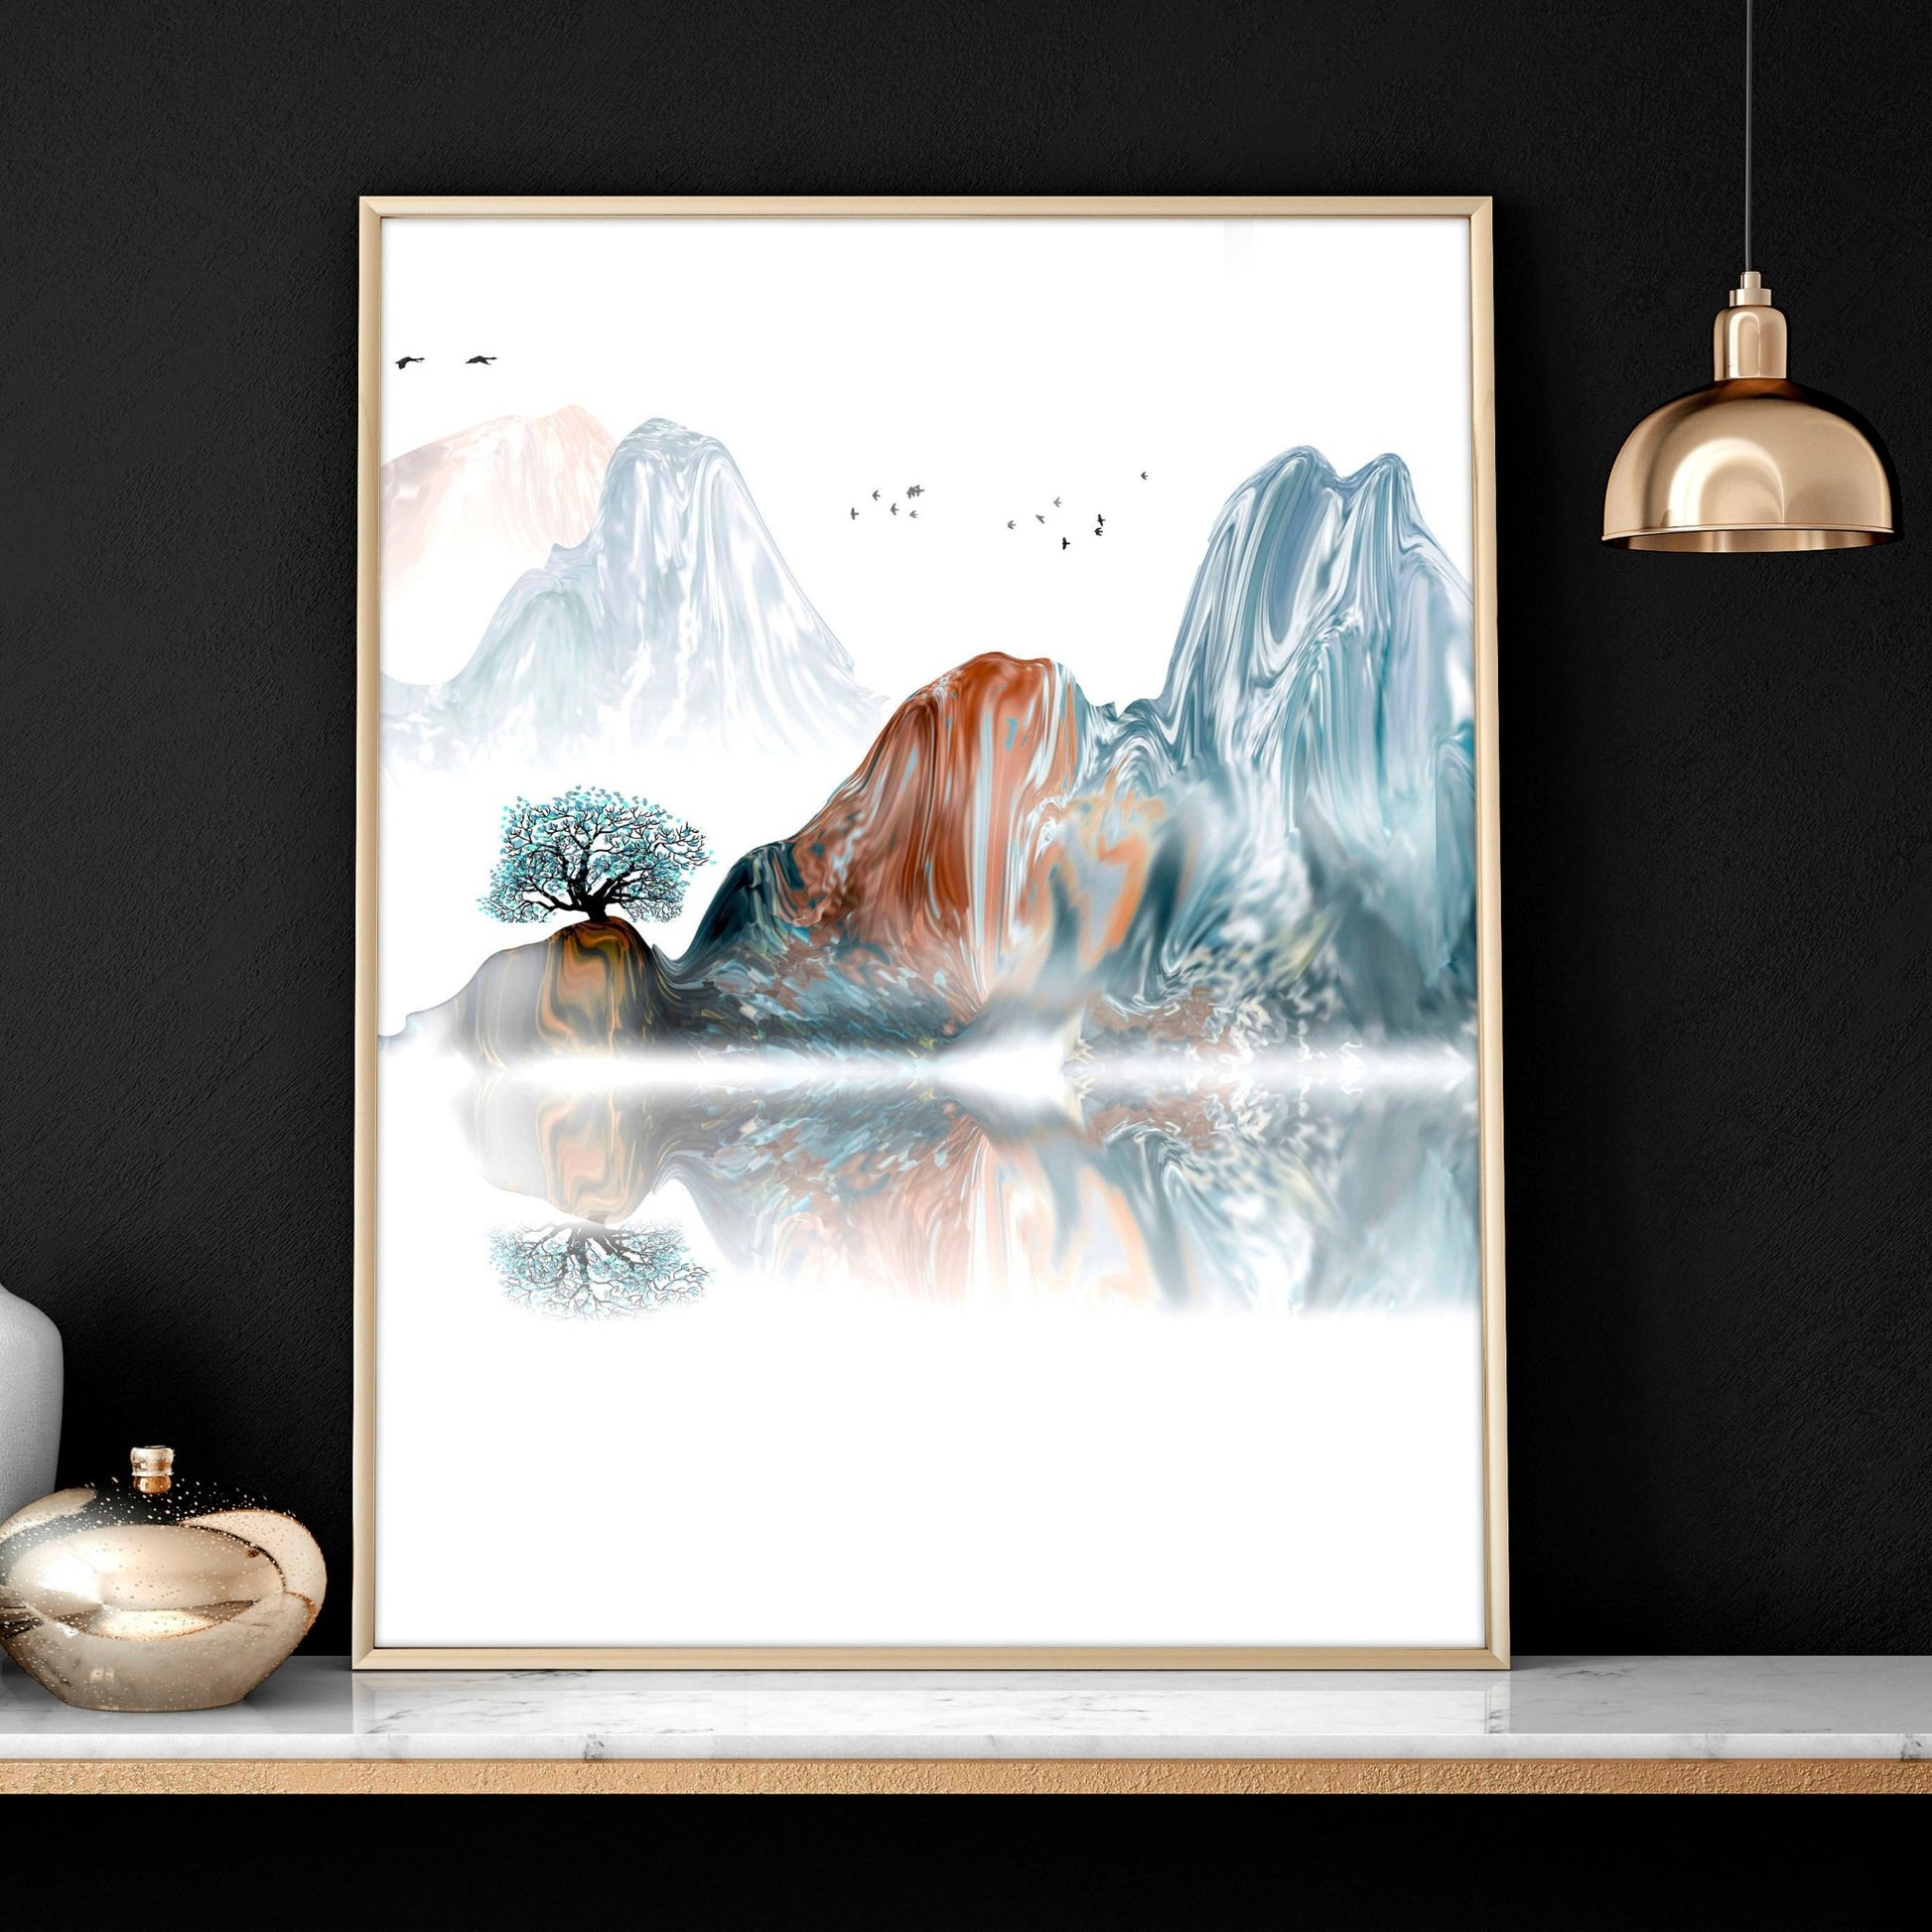 Japandi interior design | set of 3 wall art prints for Living room - About Wall Art